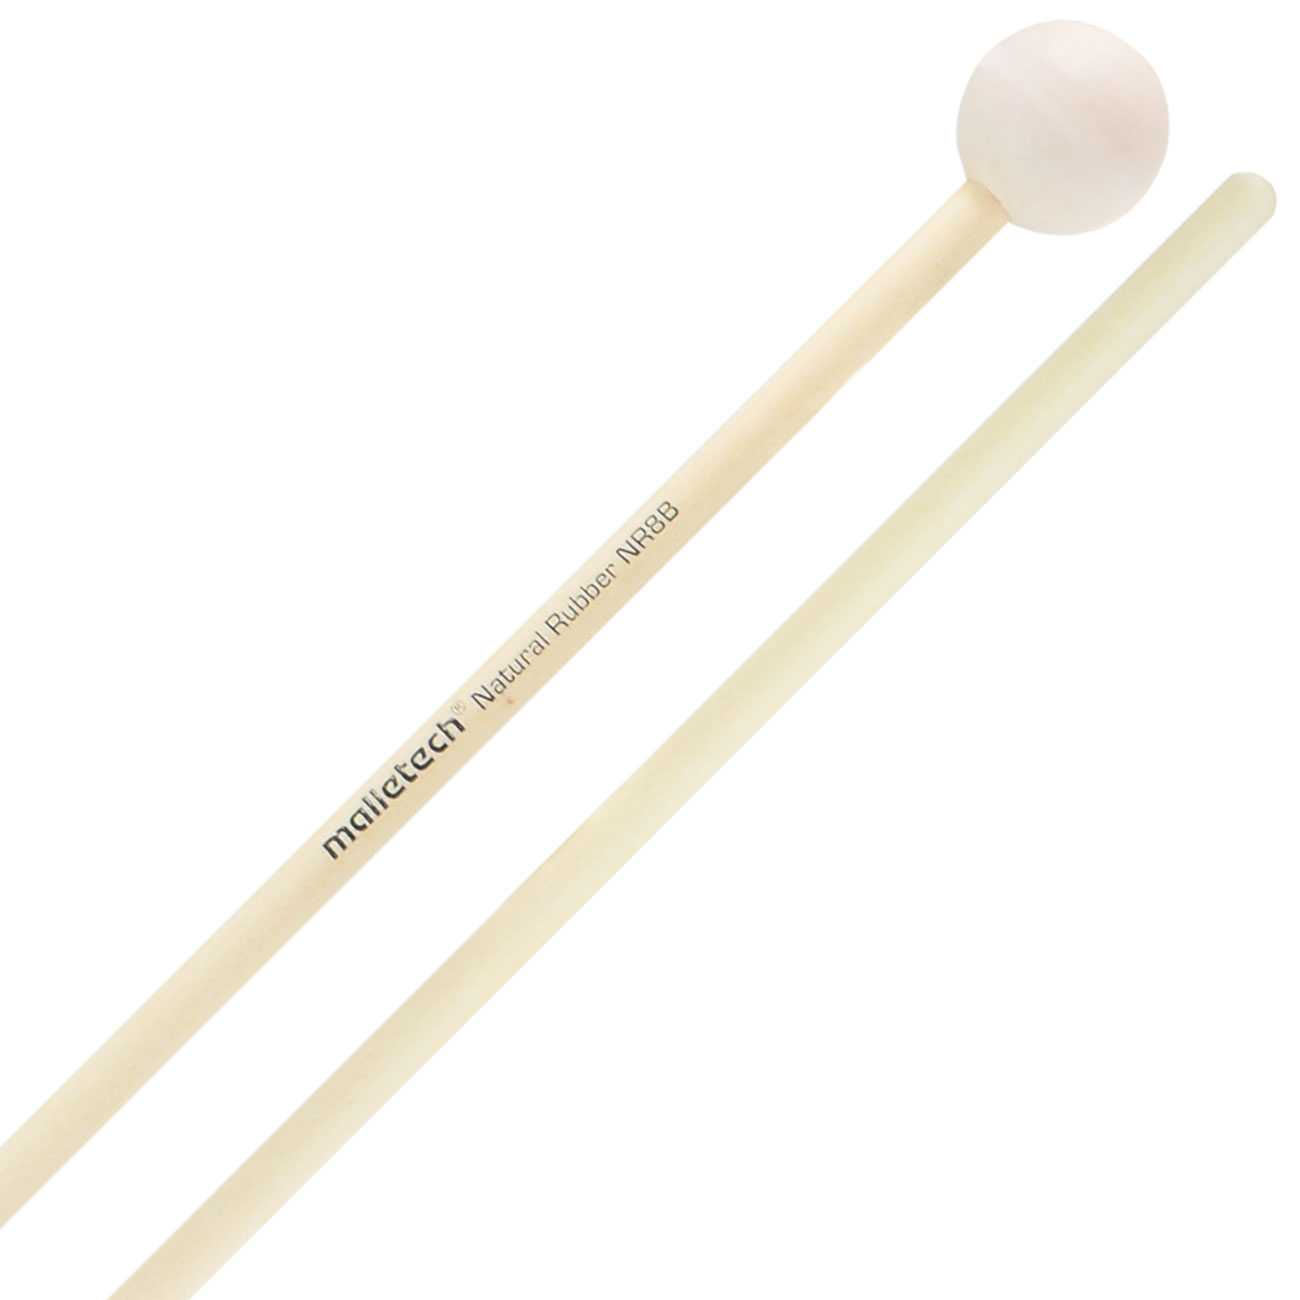 Malletech NR8 Natural Rubber Soft Xylo/Bell Mallets